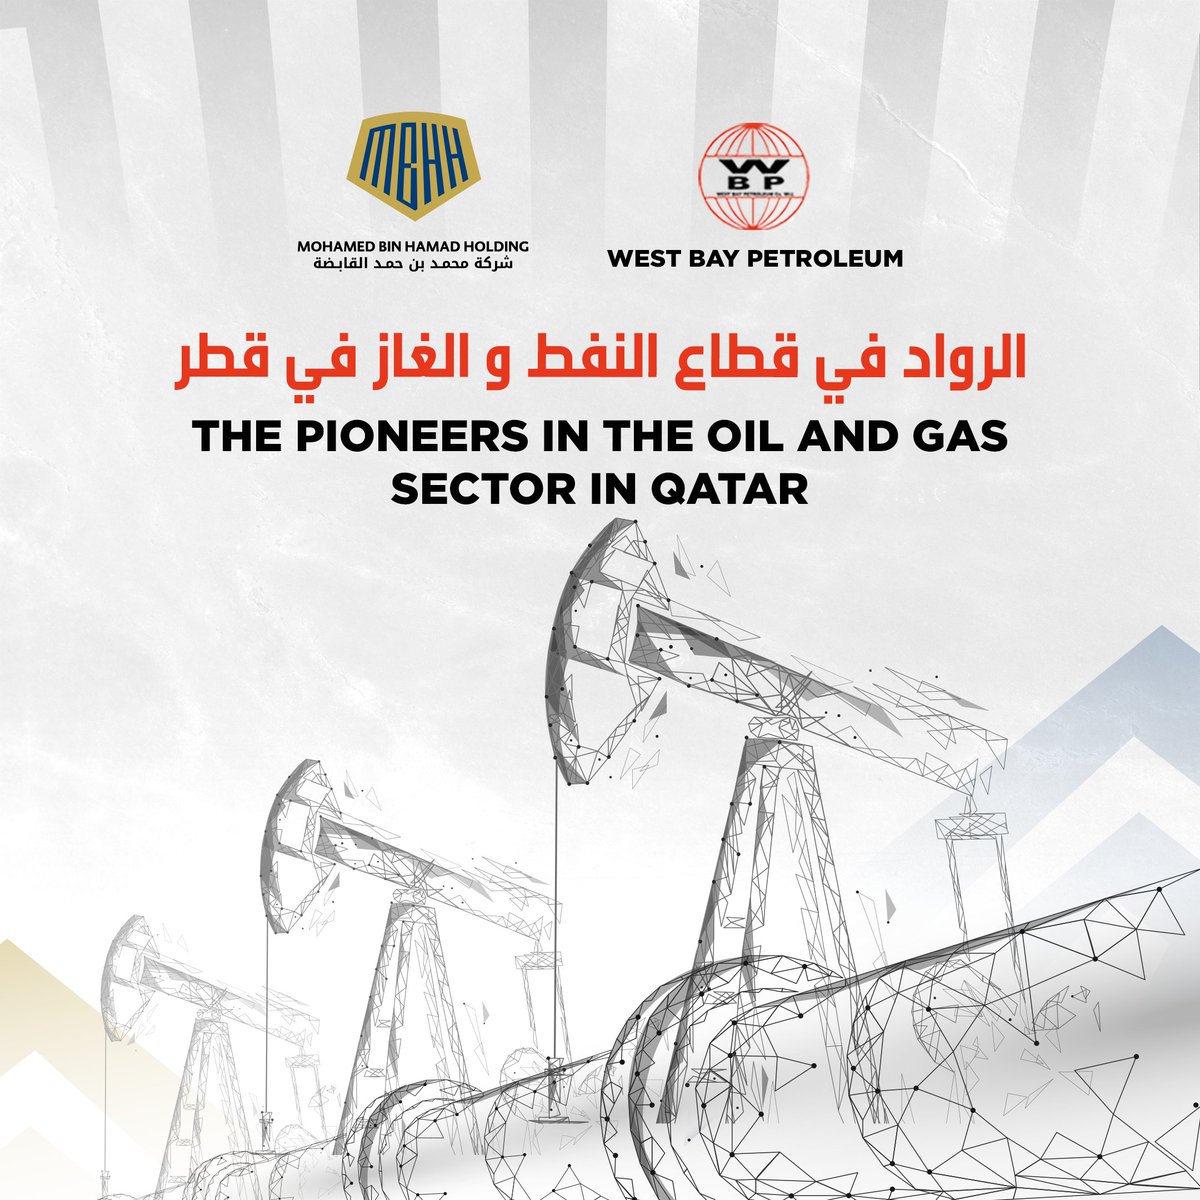 West Bay Petroleum, established in 1985, provides vital technical services and supplies to Qatar's oil and gas sector. As distributors of renowned global brands like BP Lubricants and CASTROL.

#MBHHC #OilGas #Castrol #BPlubricants #Petrochemicals